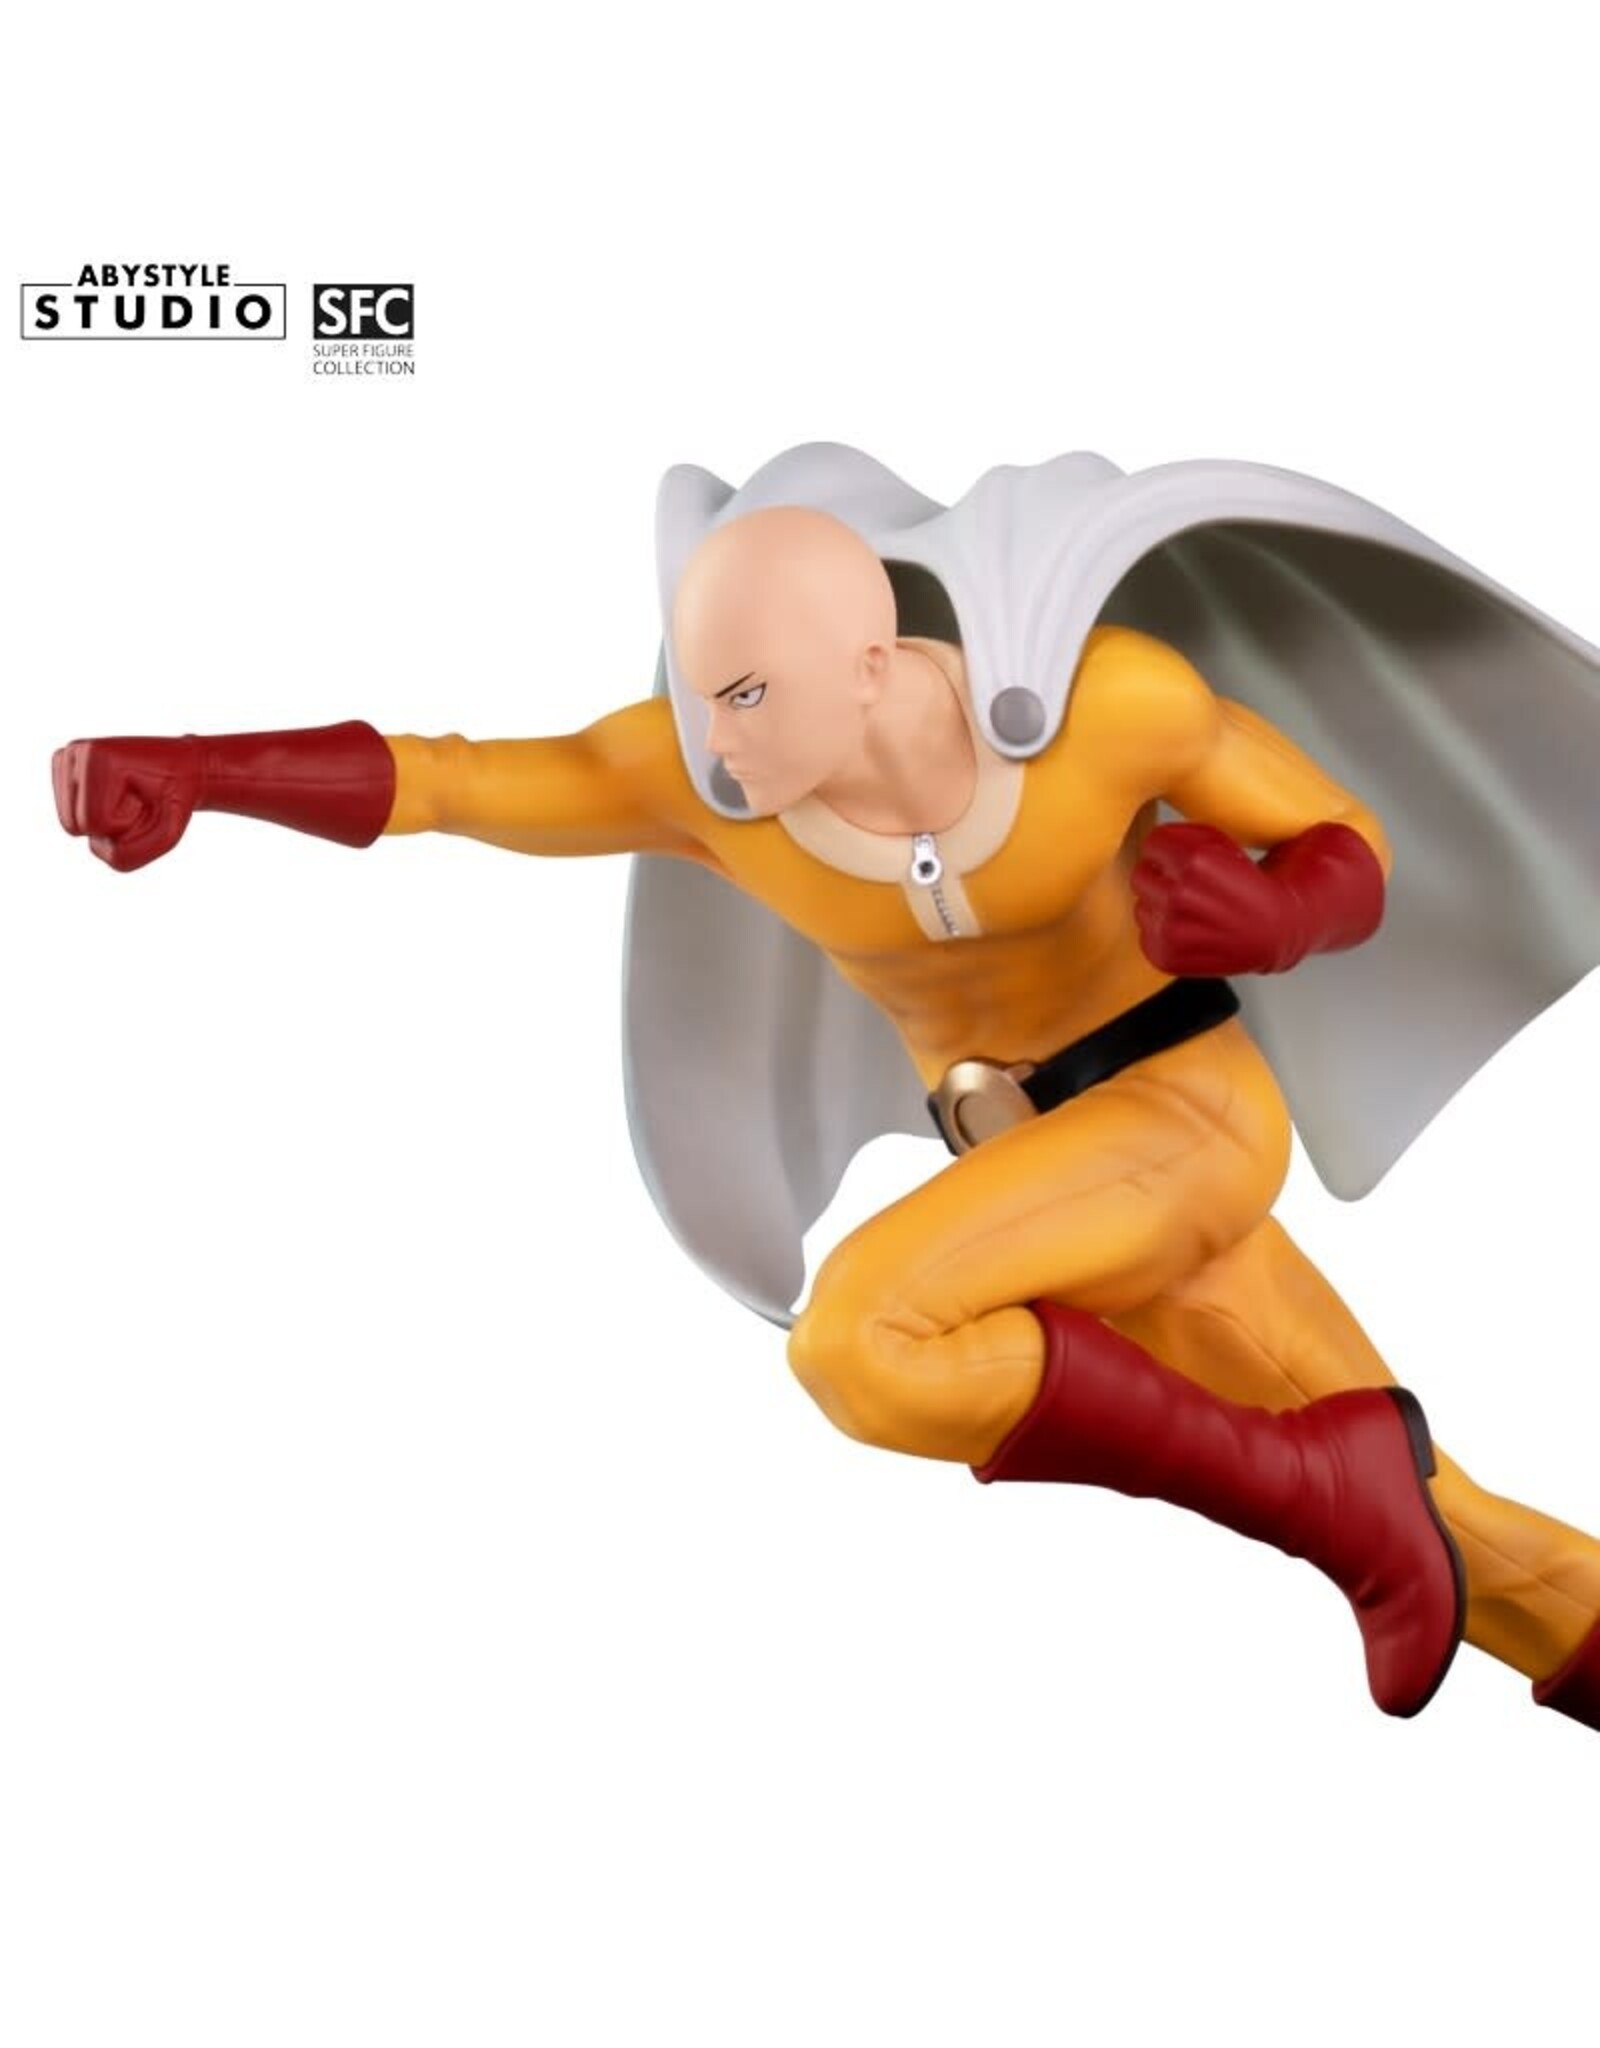 ABYSTYLE Super Figure Collection :  One Punch Man - Saitama Figure